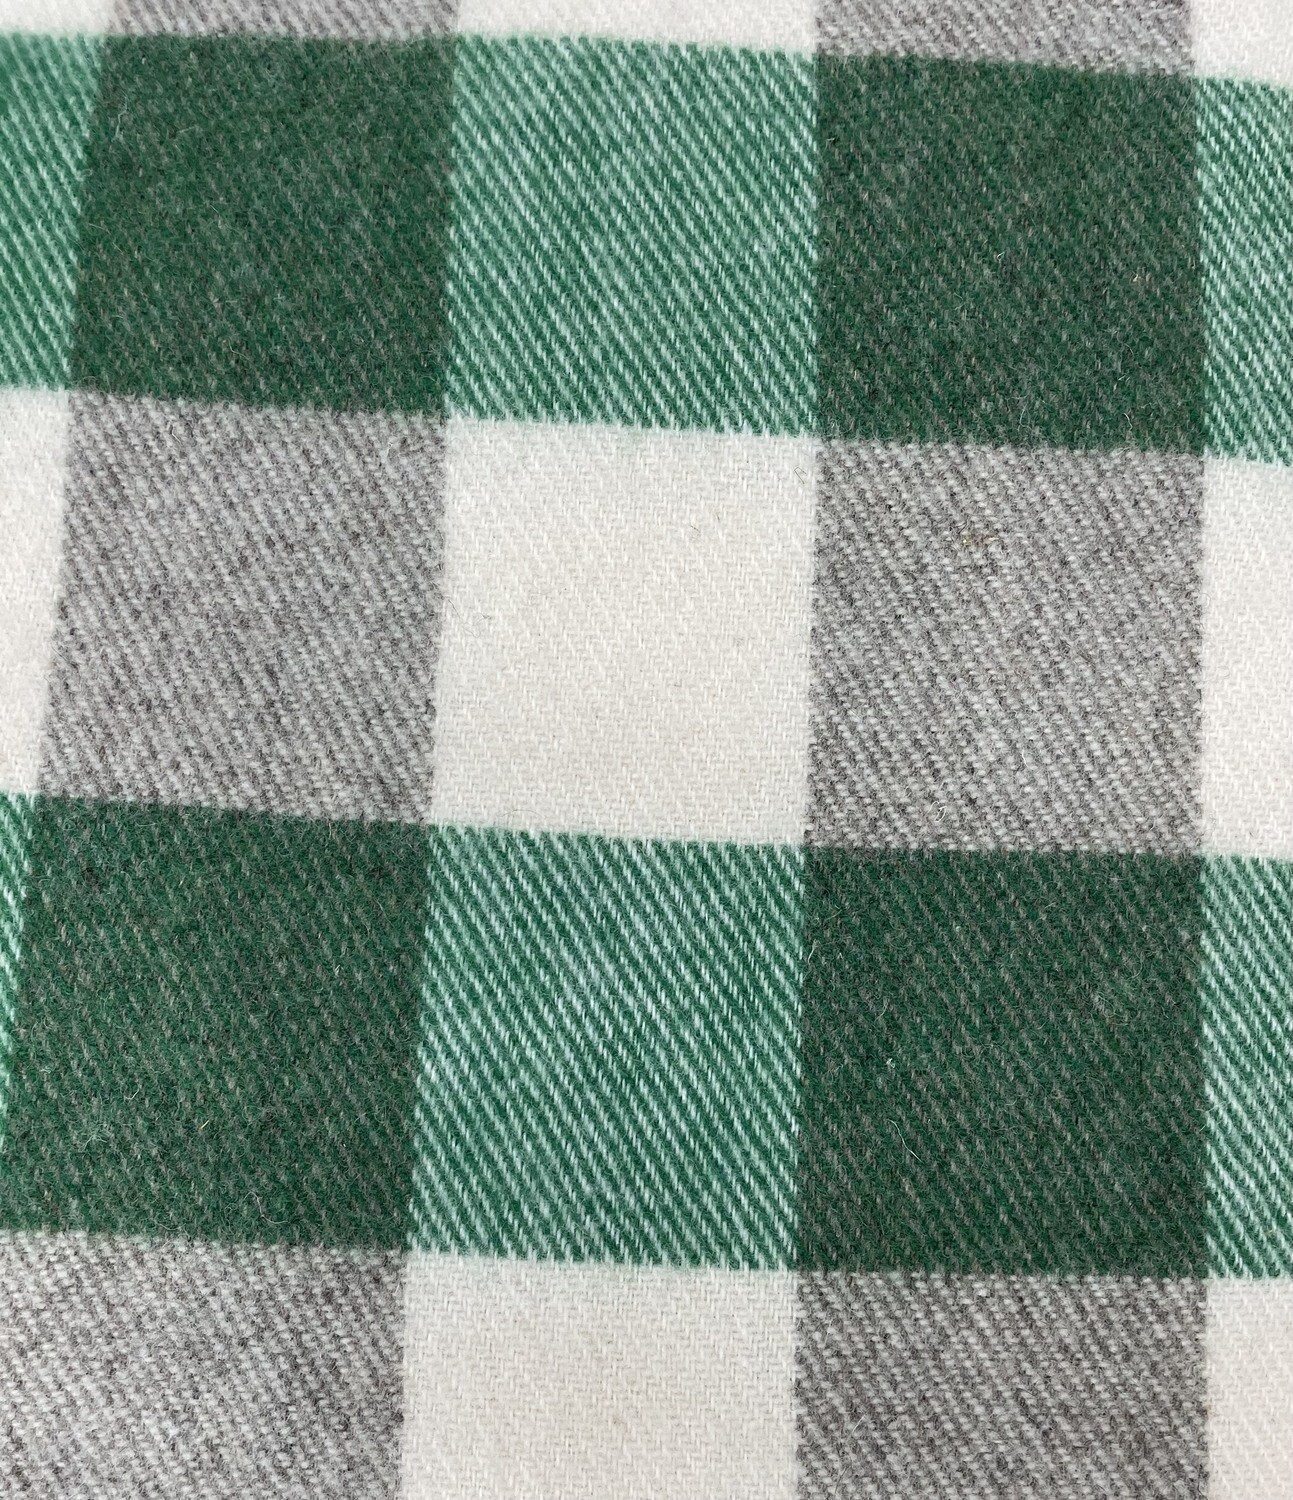 Kelly Green with Natural White MacAusland Throw Blanket 